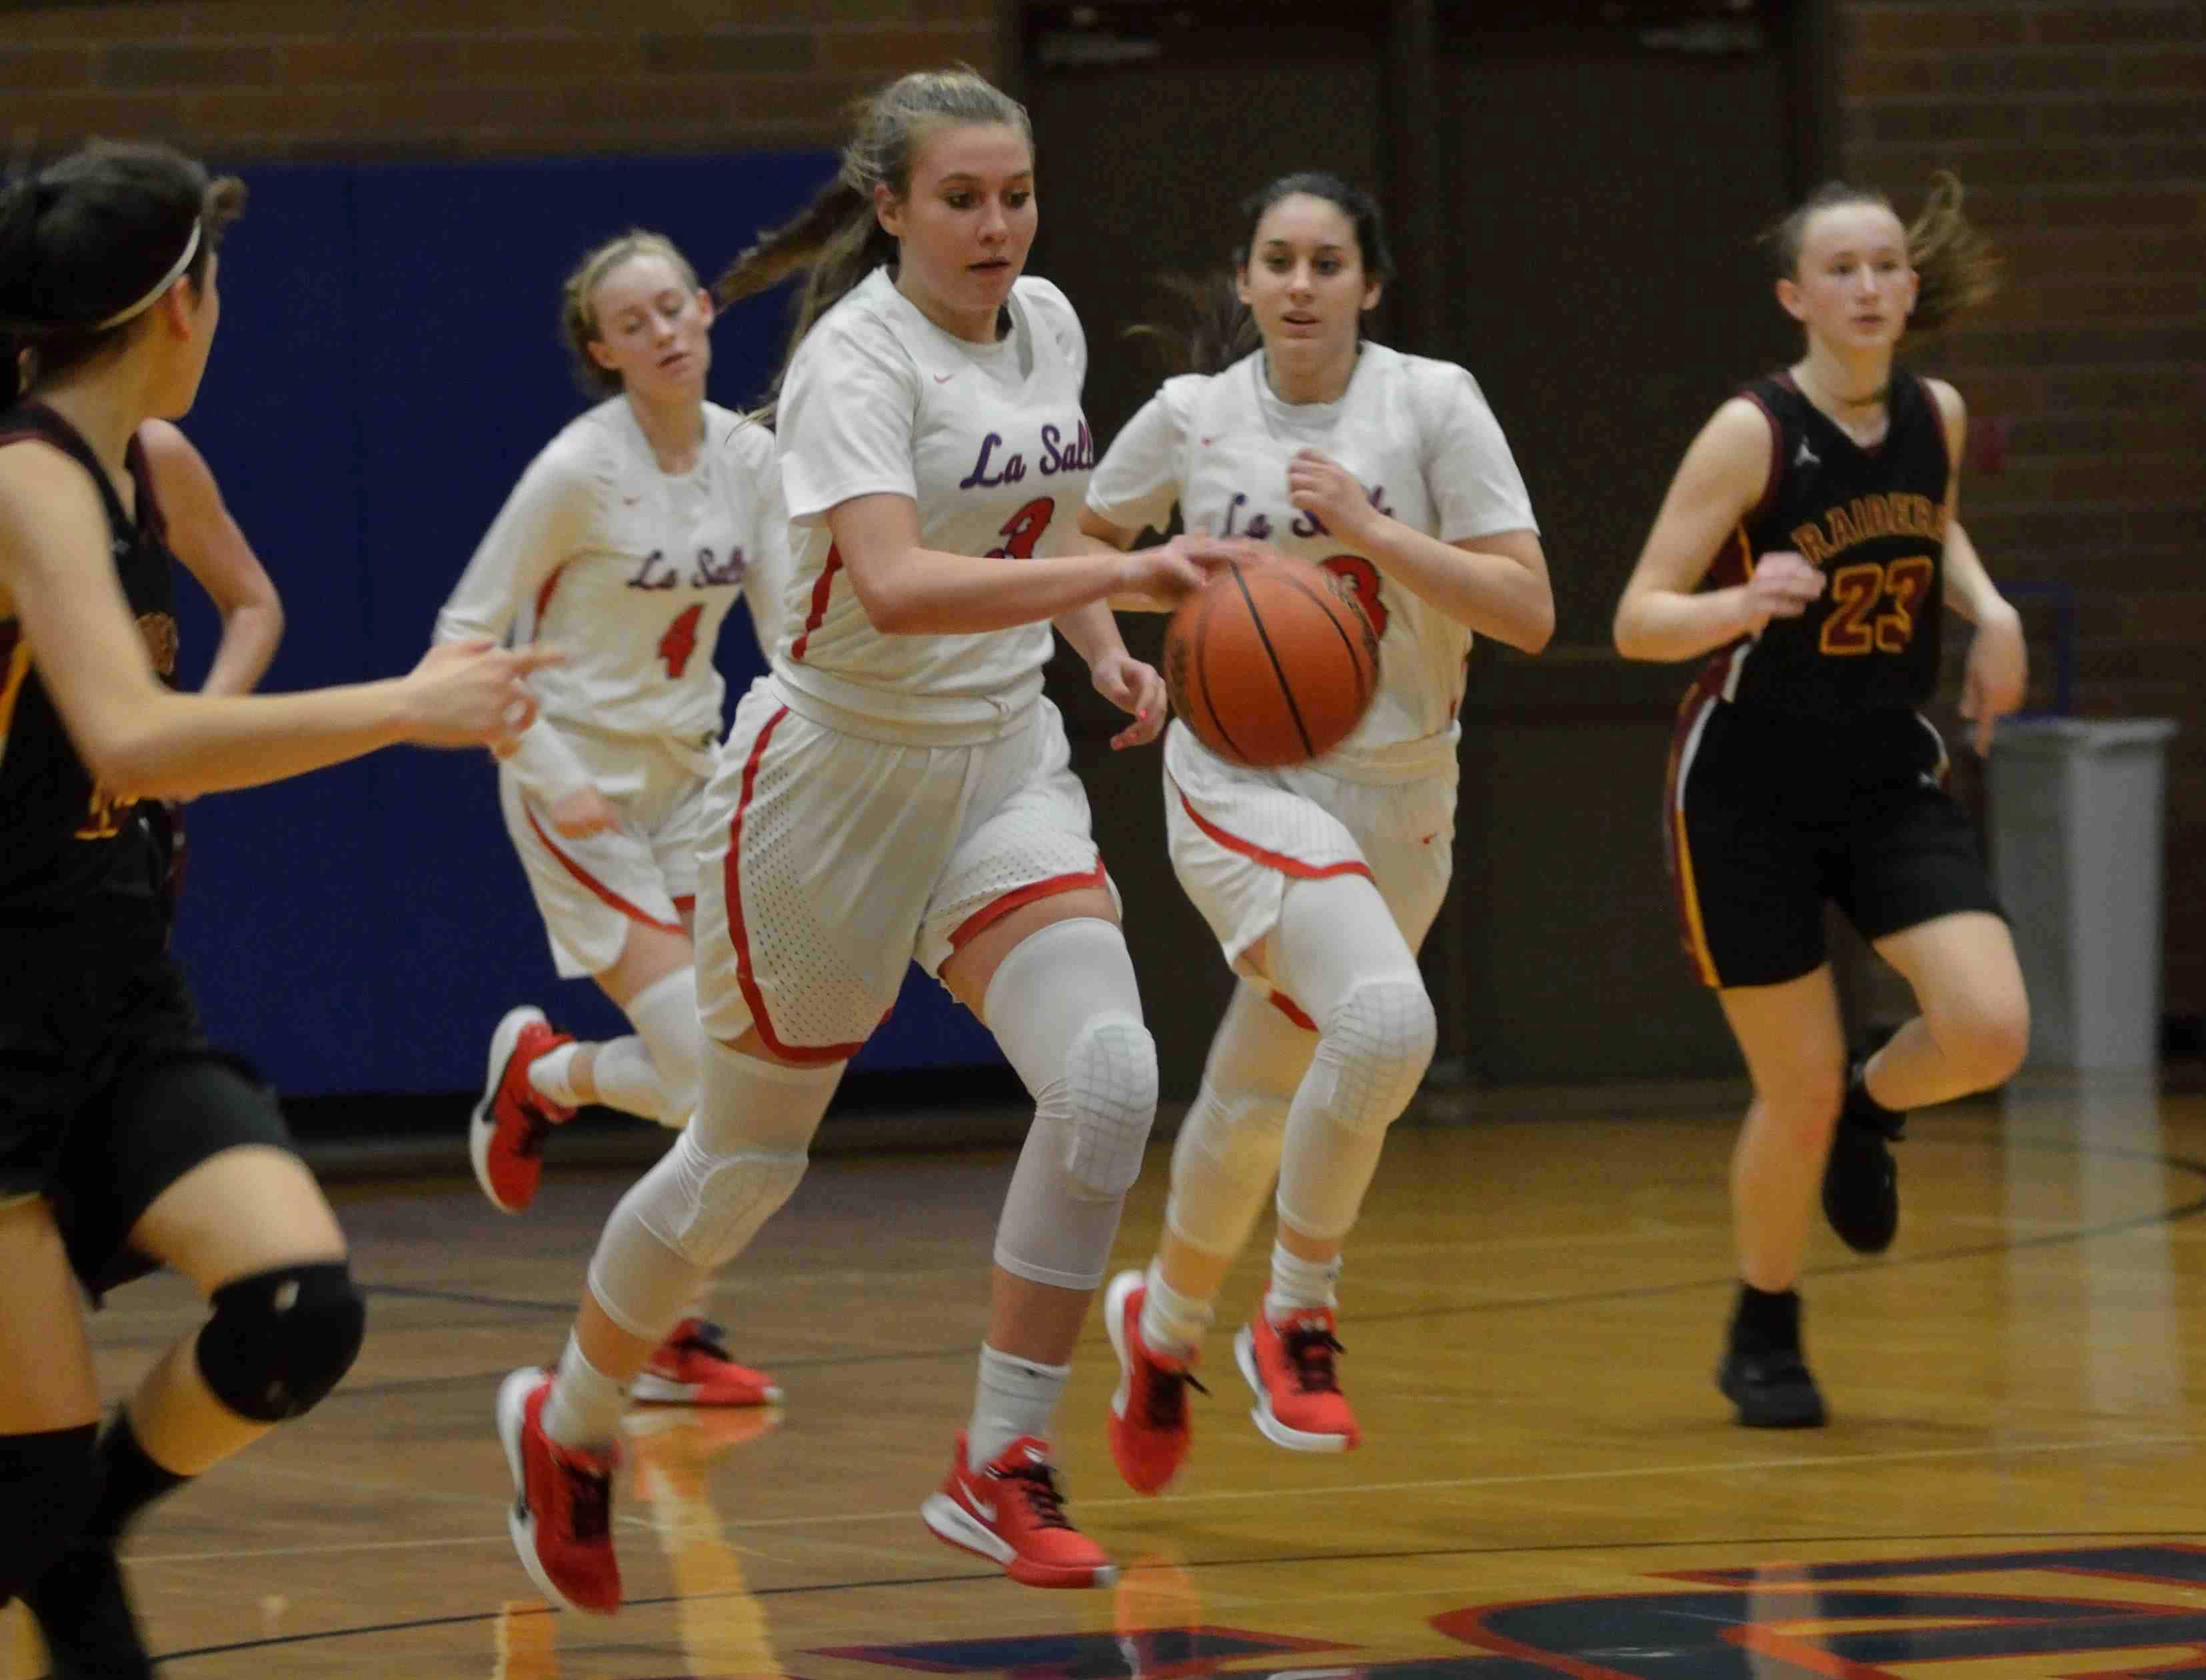 La Salle Prep's Addi Wedin scored 15 of her game-high 19 points in the second half Thursday. (Photo by Derrick Drango)